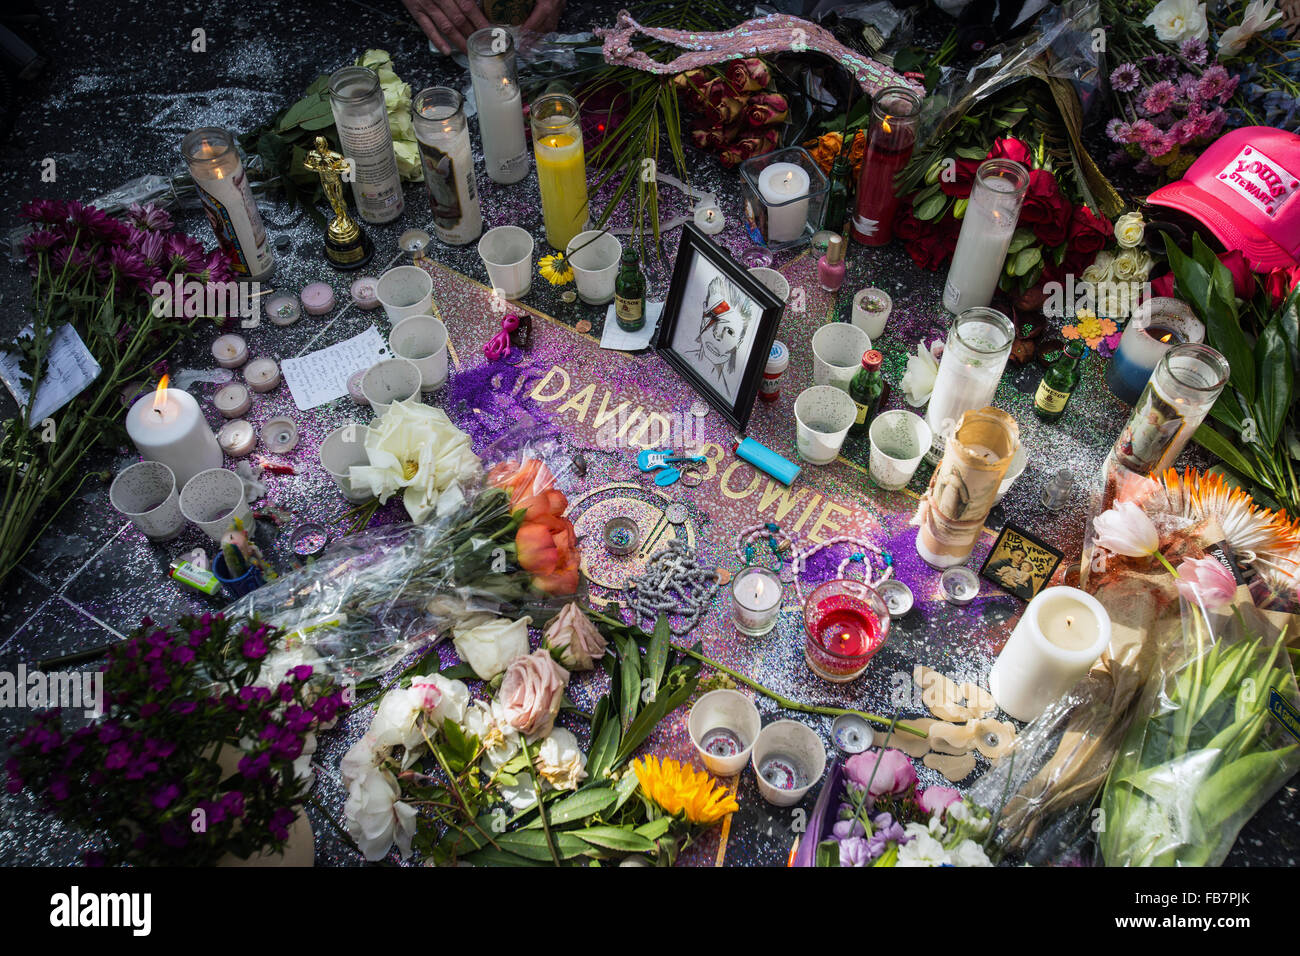 Fans pay tribute to David Bowie the day after his death at his star on the Hollywood Walk of Fame. Stock Photo